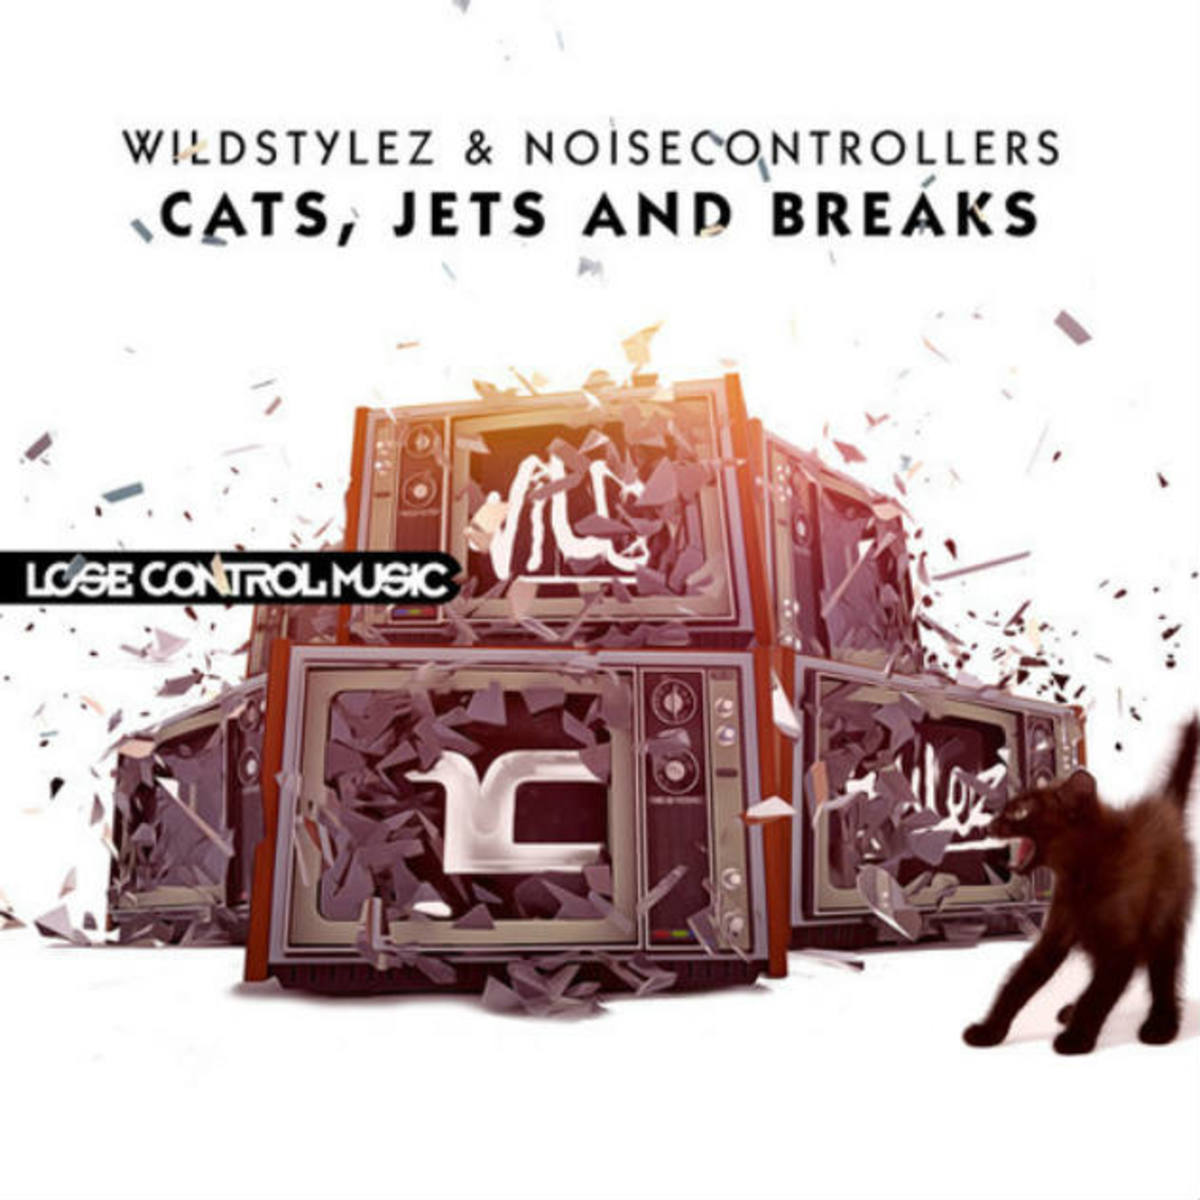 Wildstylez & Noisecontrollers Team Up for the Release of "Cats, Jets And Breaks" on Lose Control Music